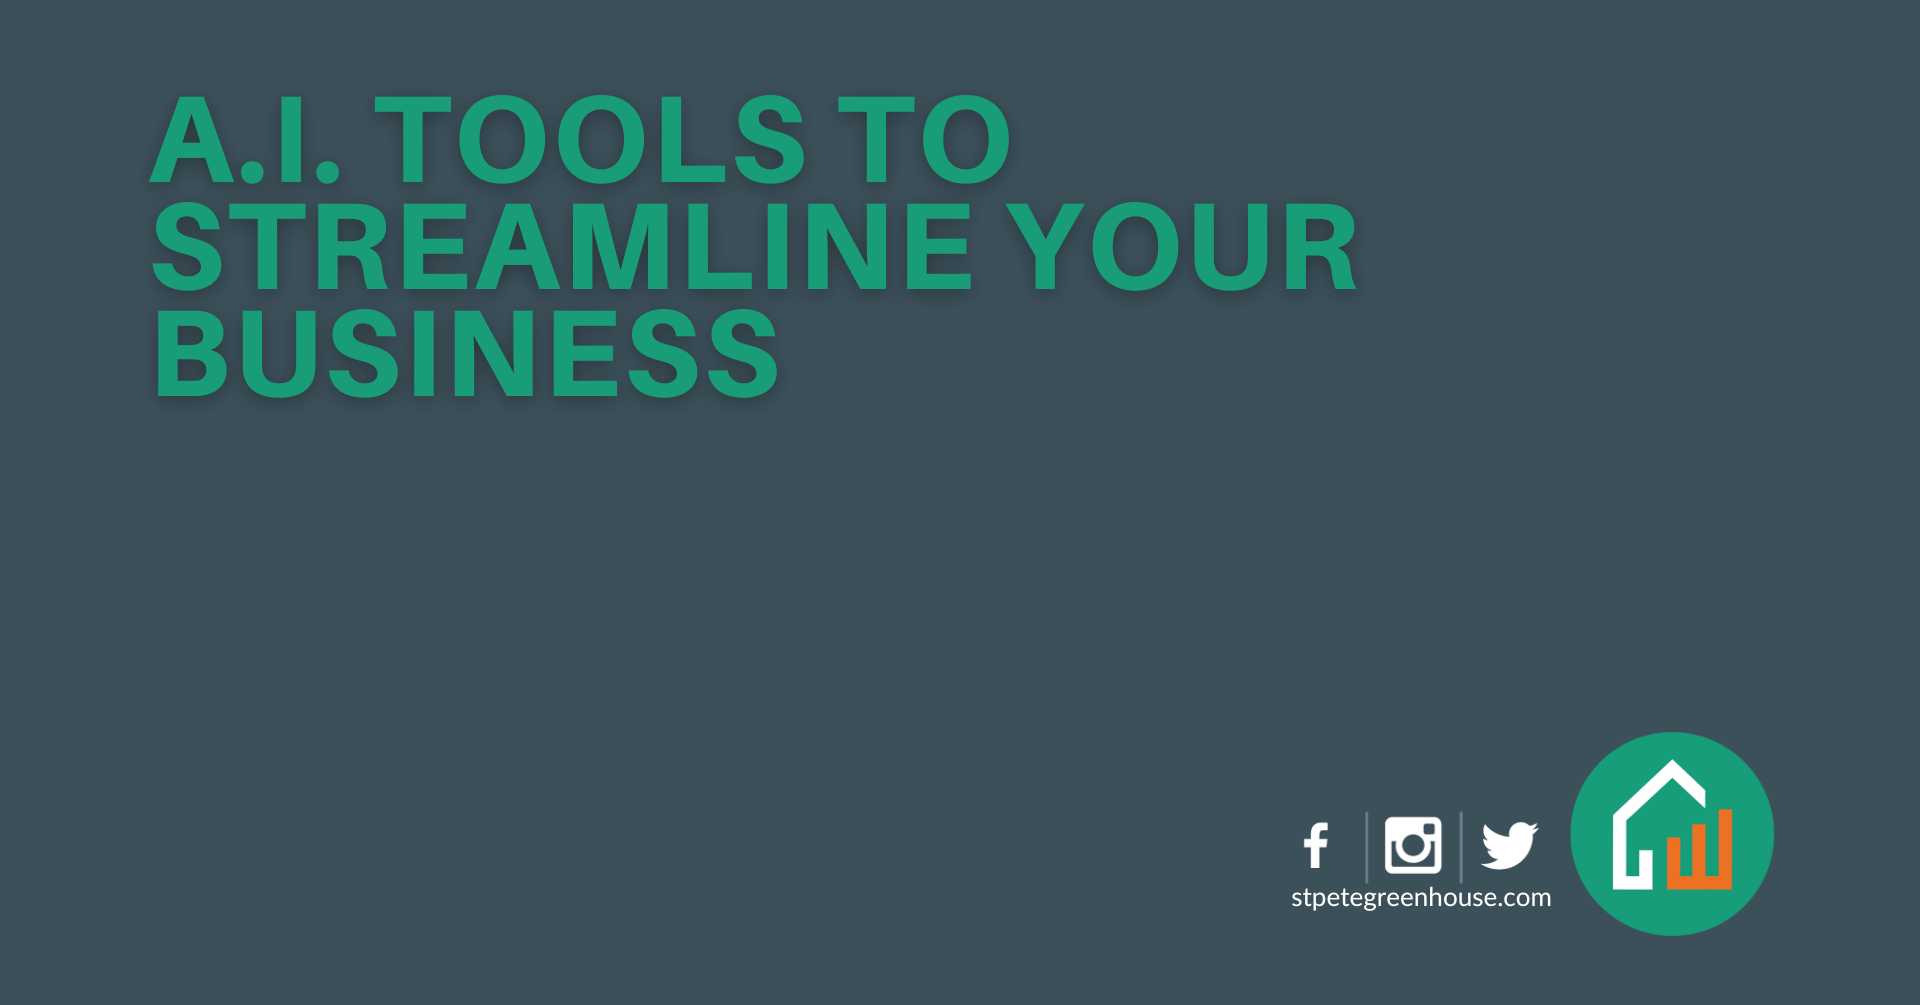 Getting Started with A.I. Tools: Tools to Streamline Your Business-image